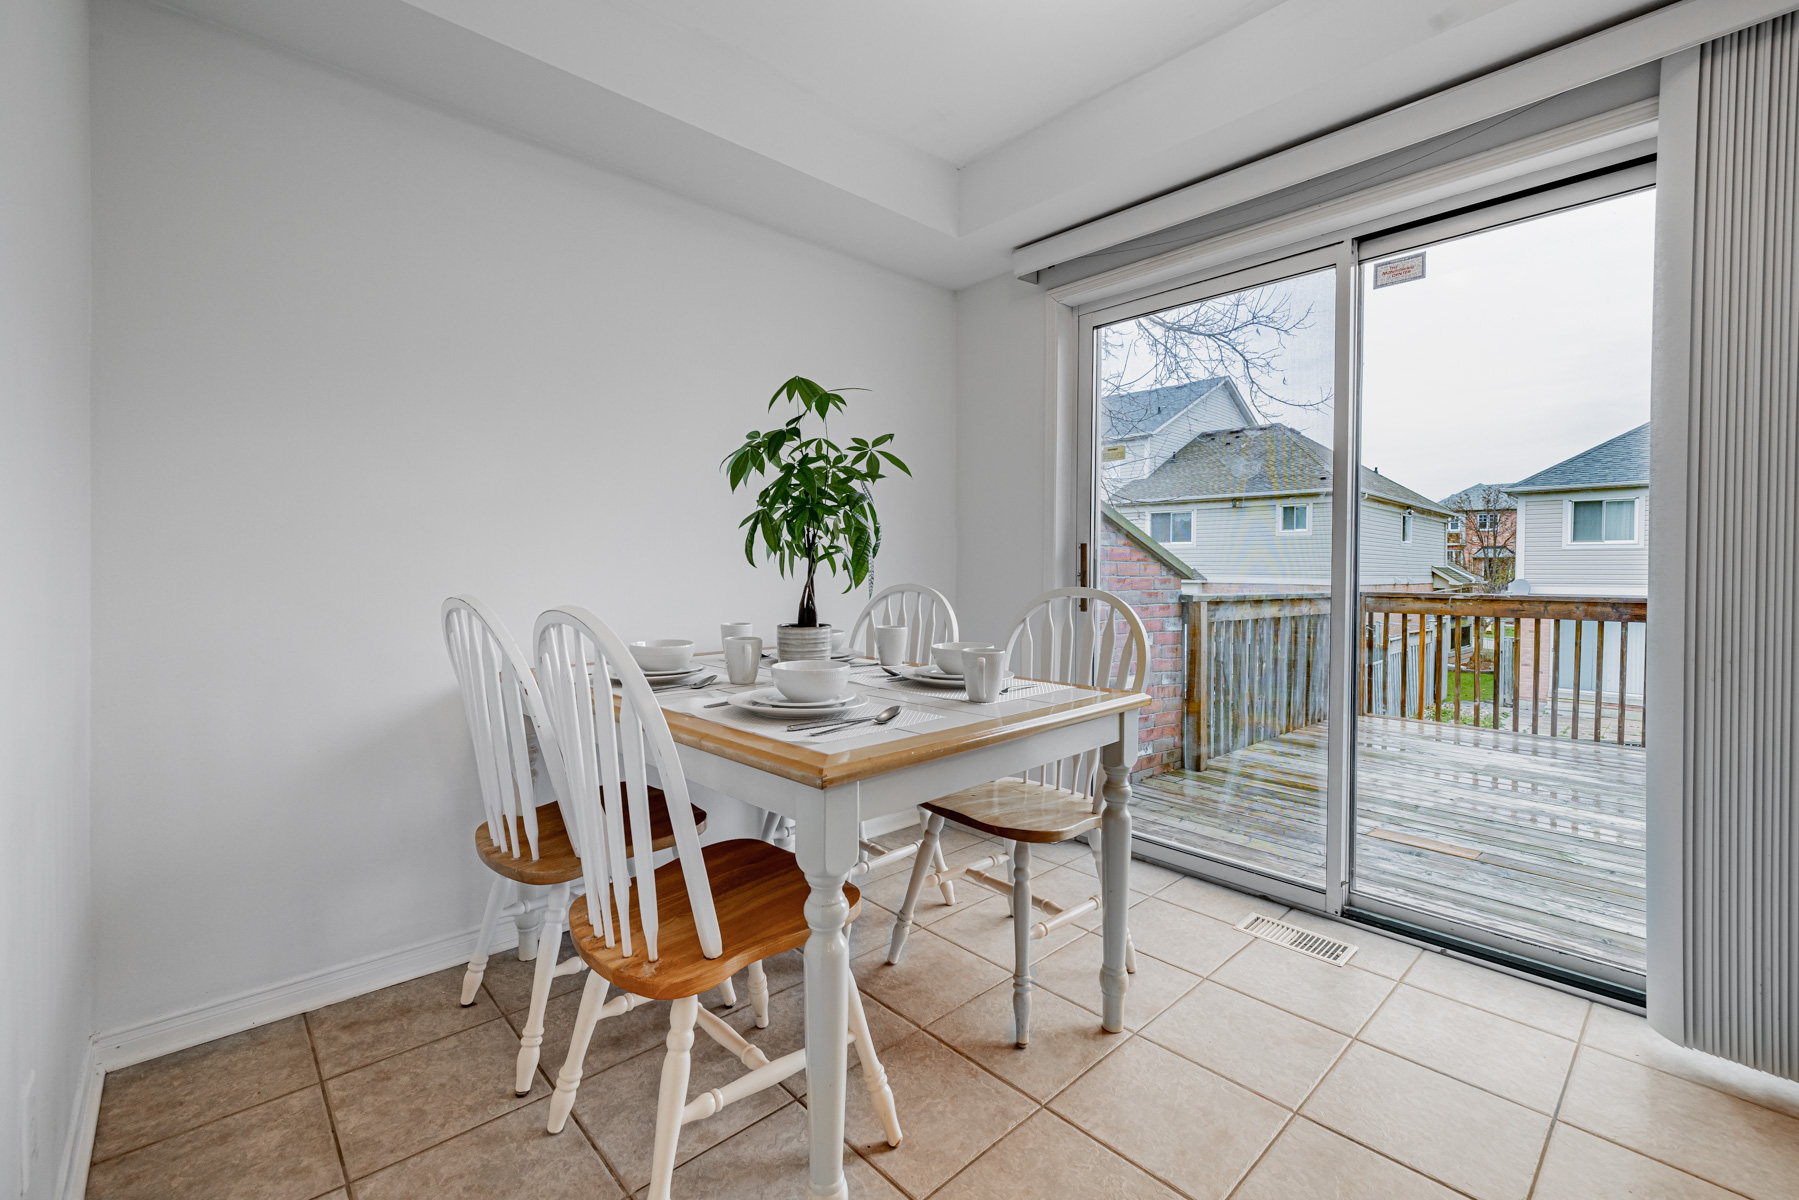 77 Schouten Cres breakfast book with dining table, chairs and view of backyard.